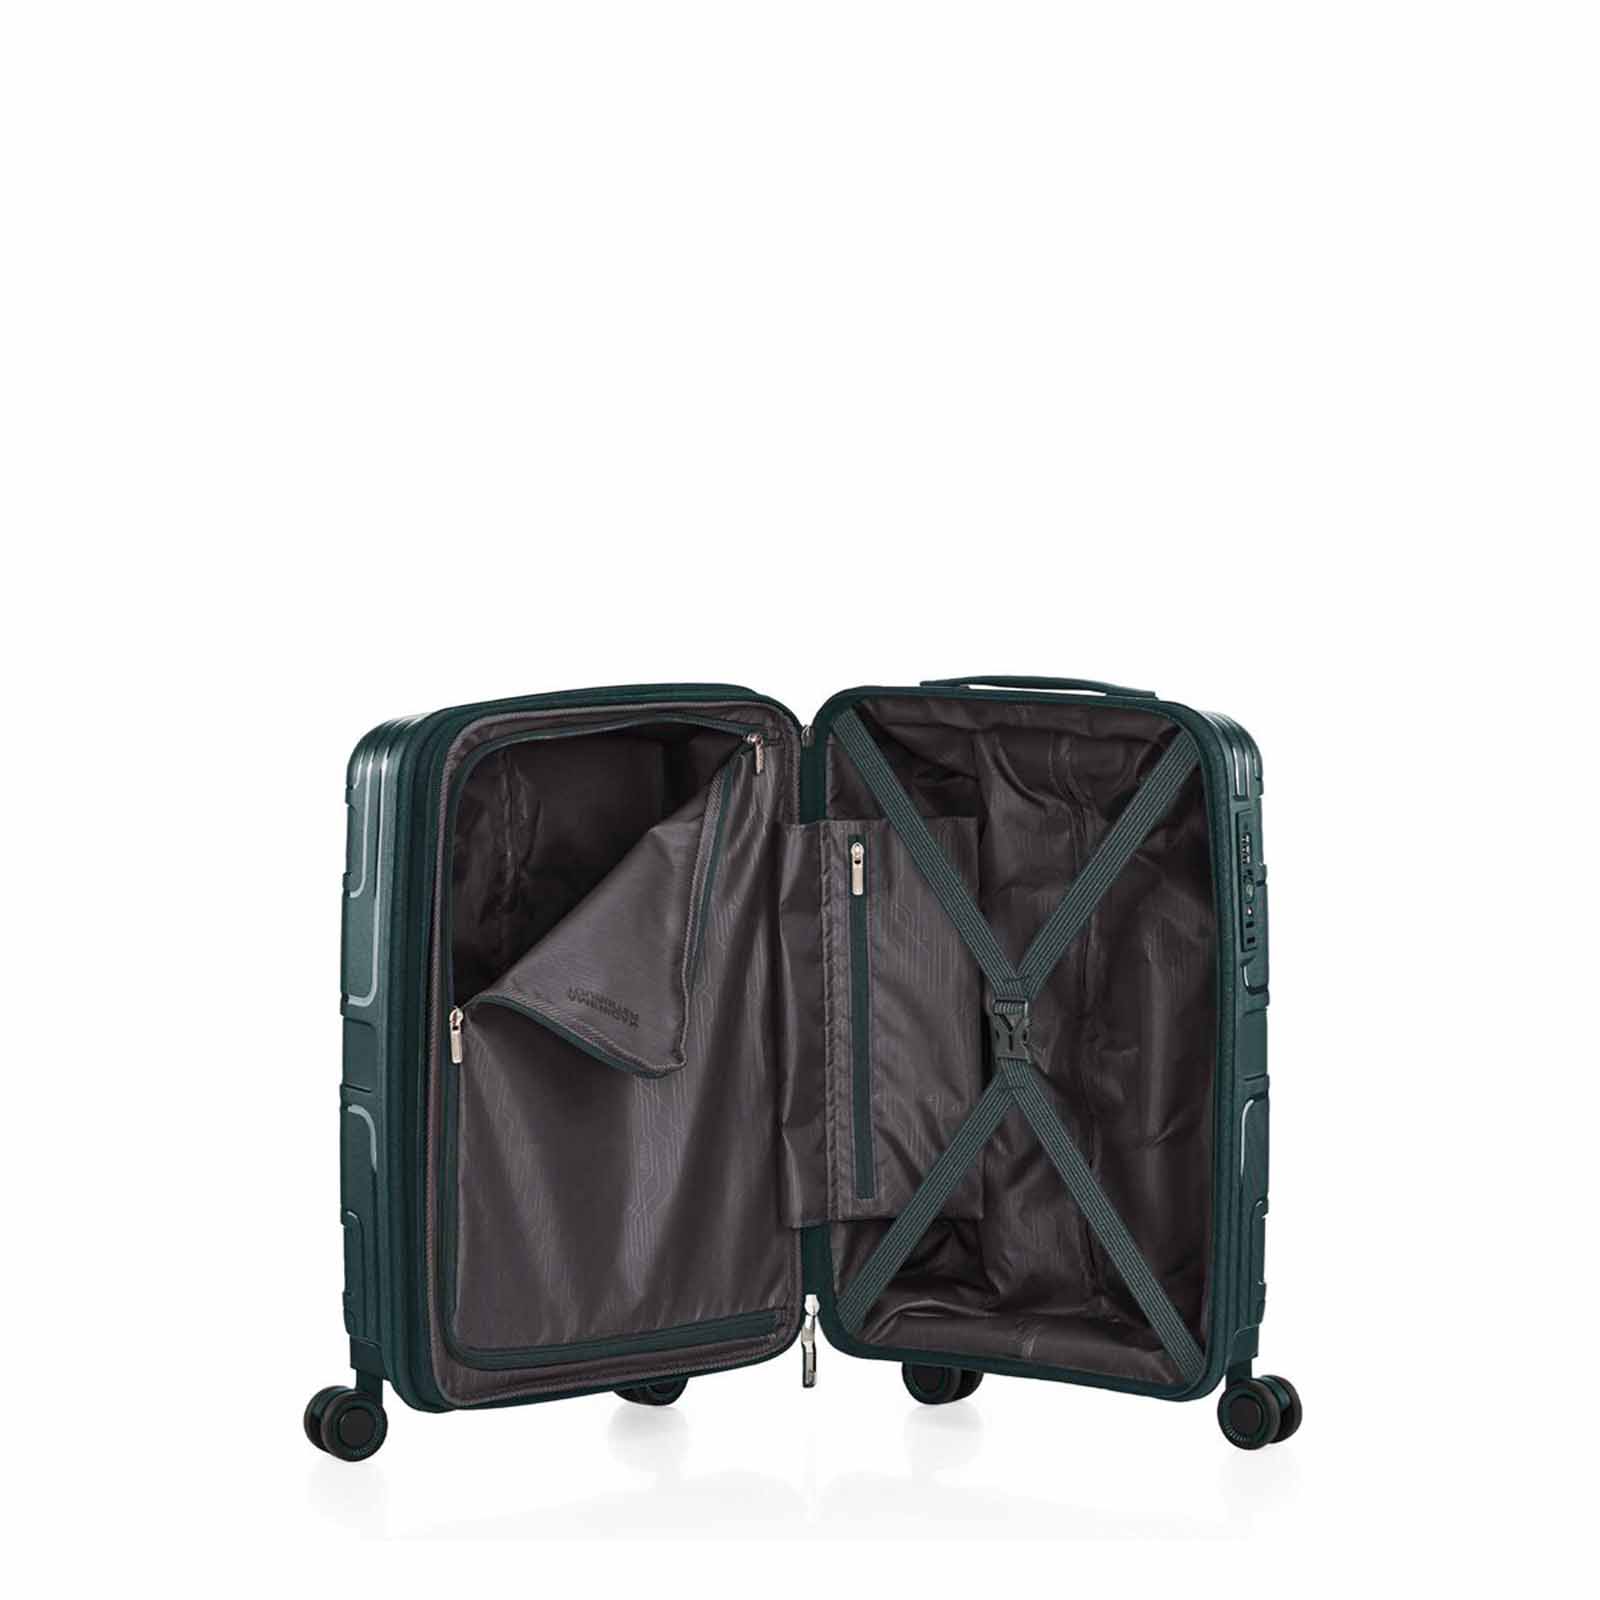 American-Tourister-Light-Max-55cm-Carry-On-Suitcase-Varsity-Green-Open